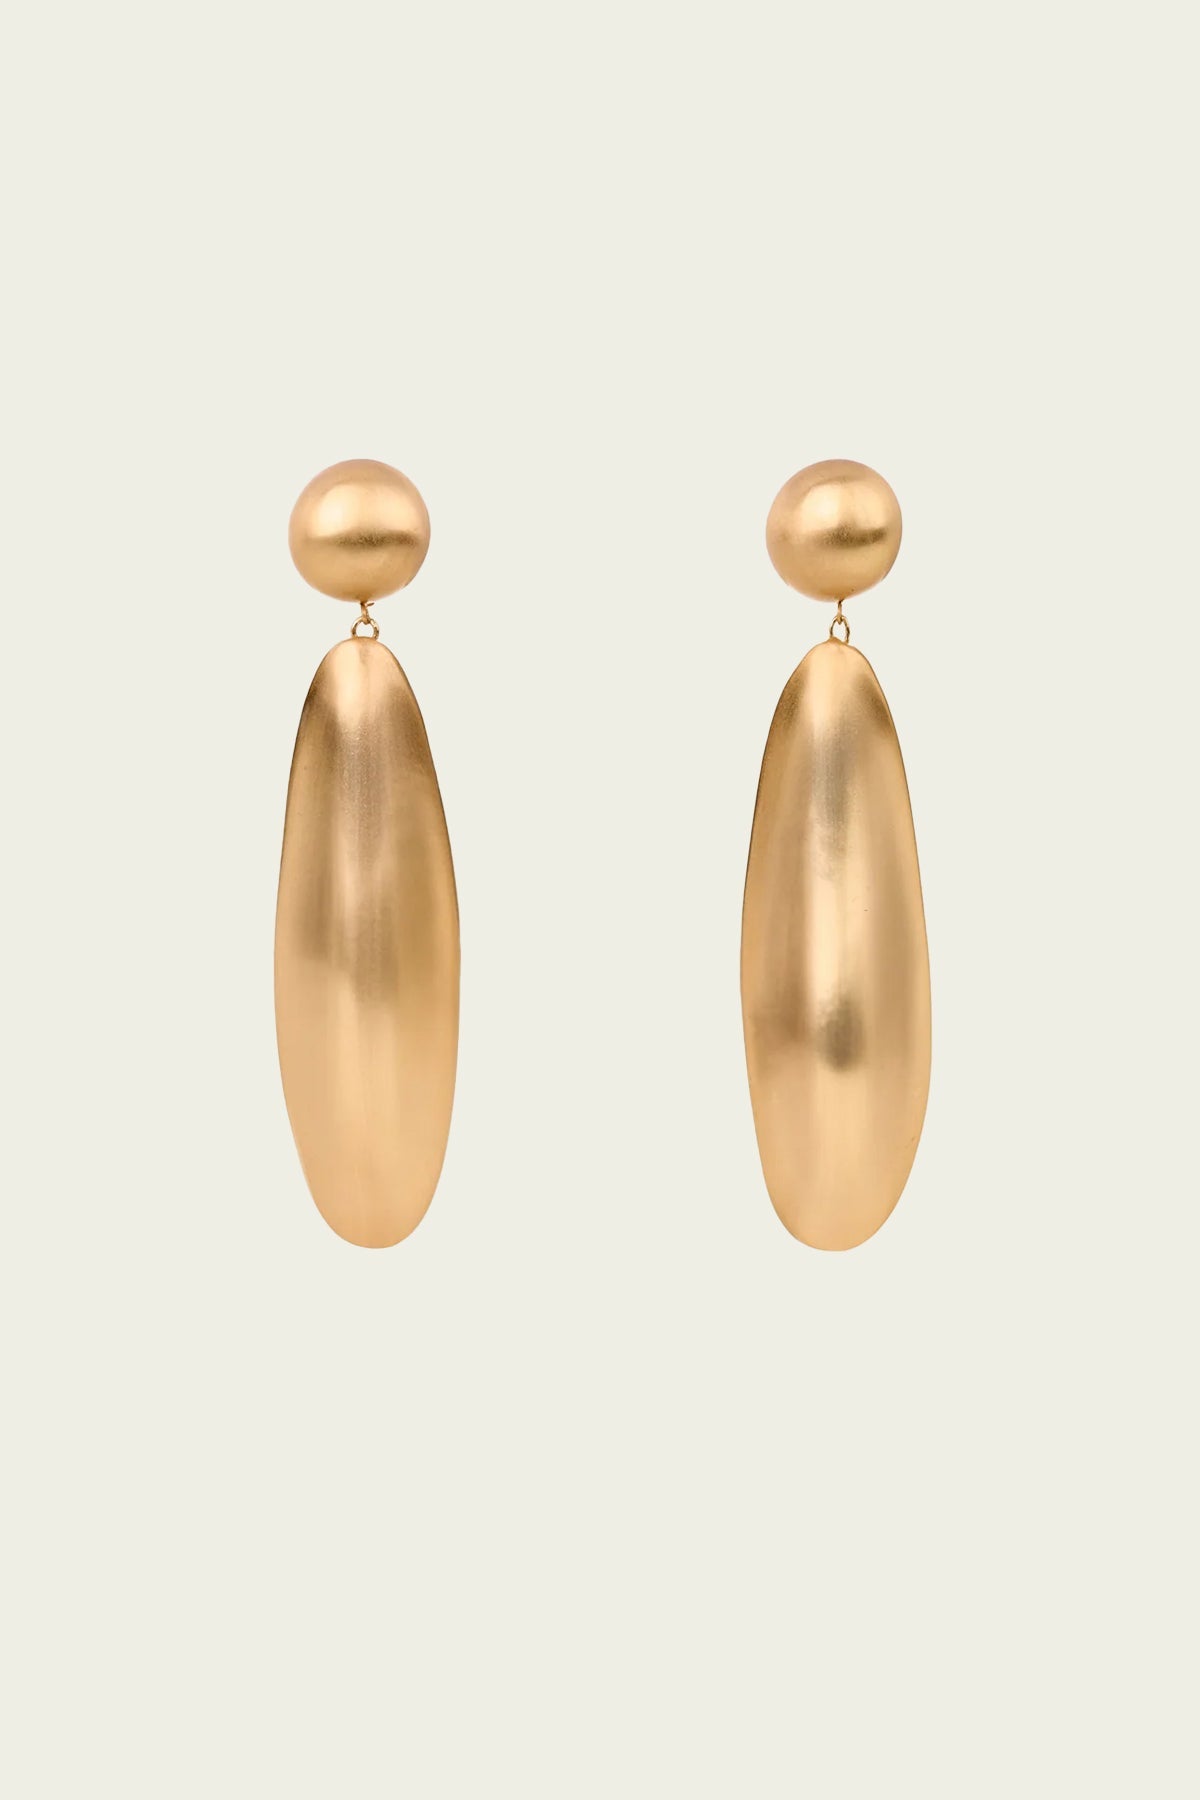 Fiore Earring in Brushed Brass - shop - olivia.com